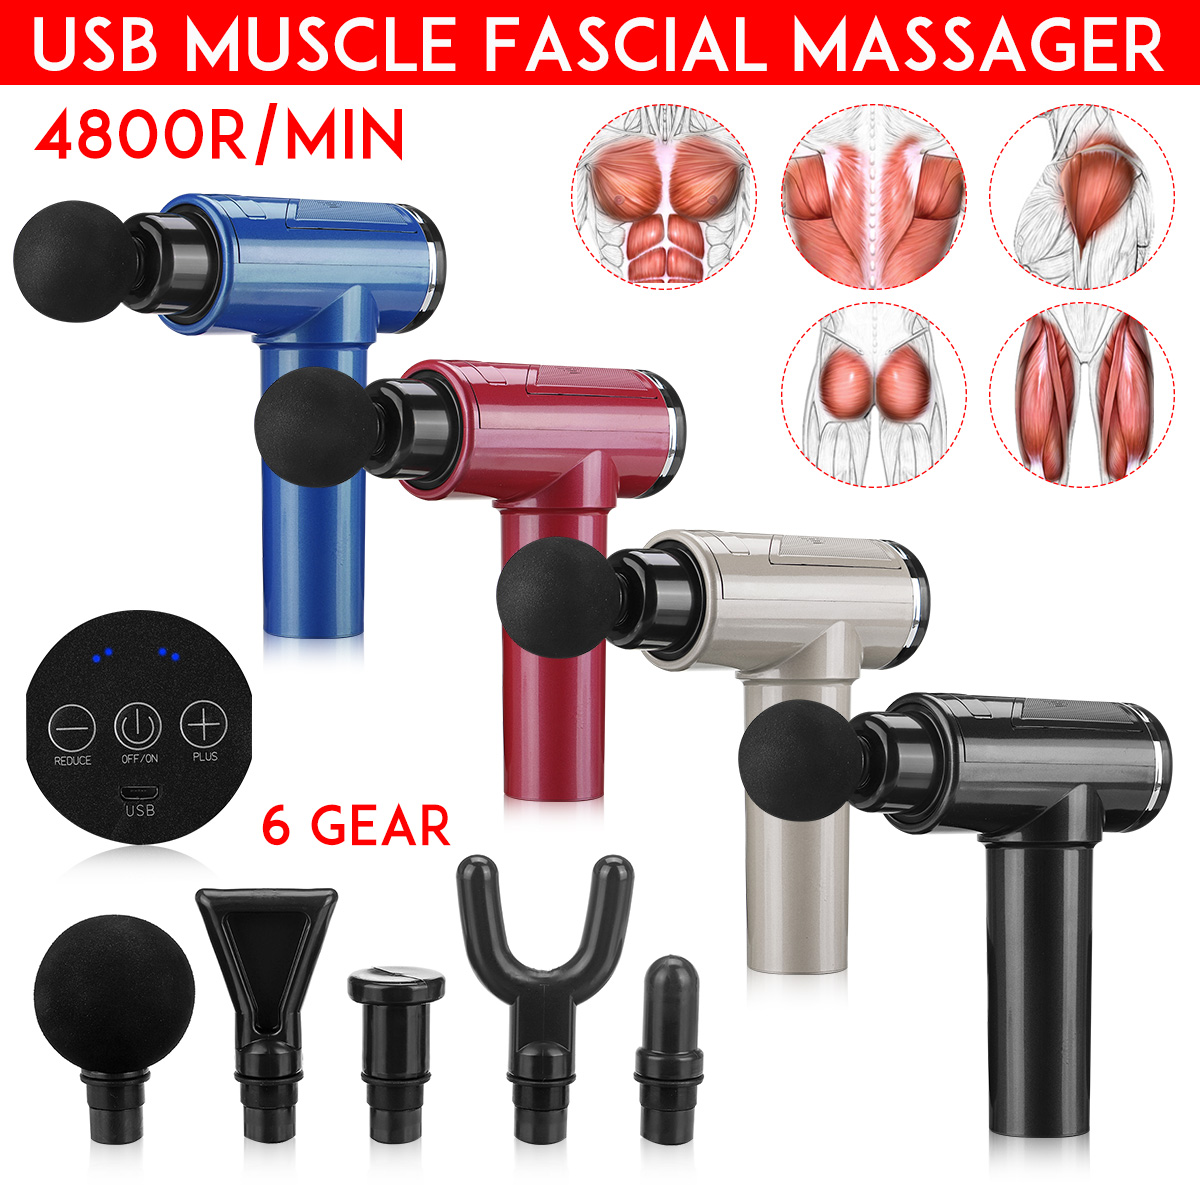 3600-4800rmin-6-Speed-Muscle-Relief-Massage-Therapy-USB-Vibration-Deep-Tissue-Electric-Percussion-Ma-1715805-1